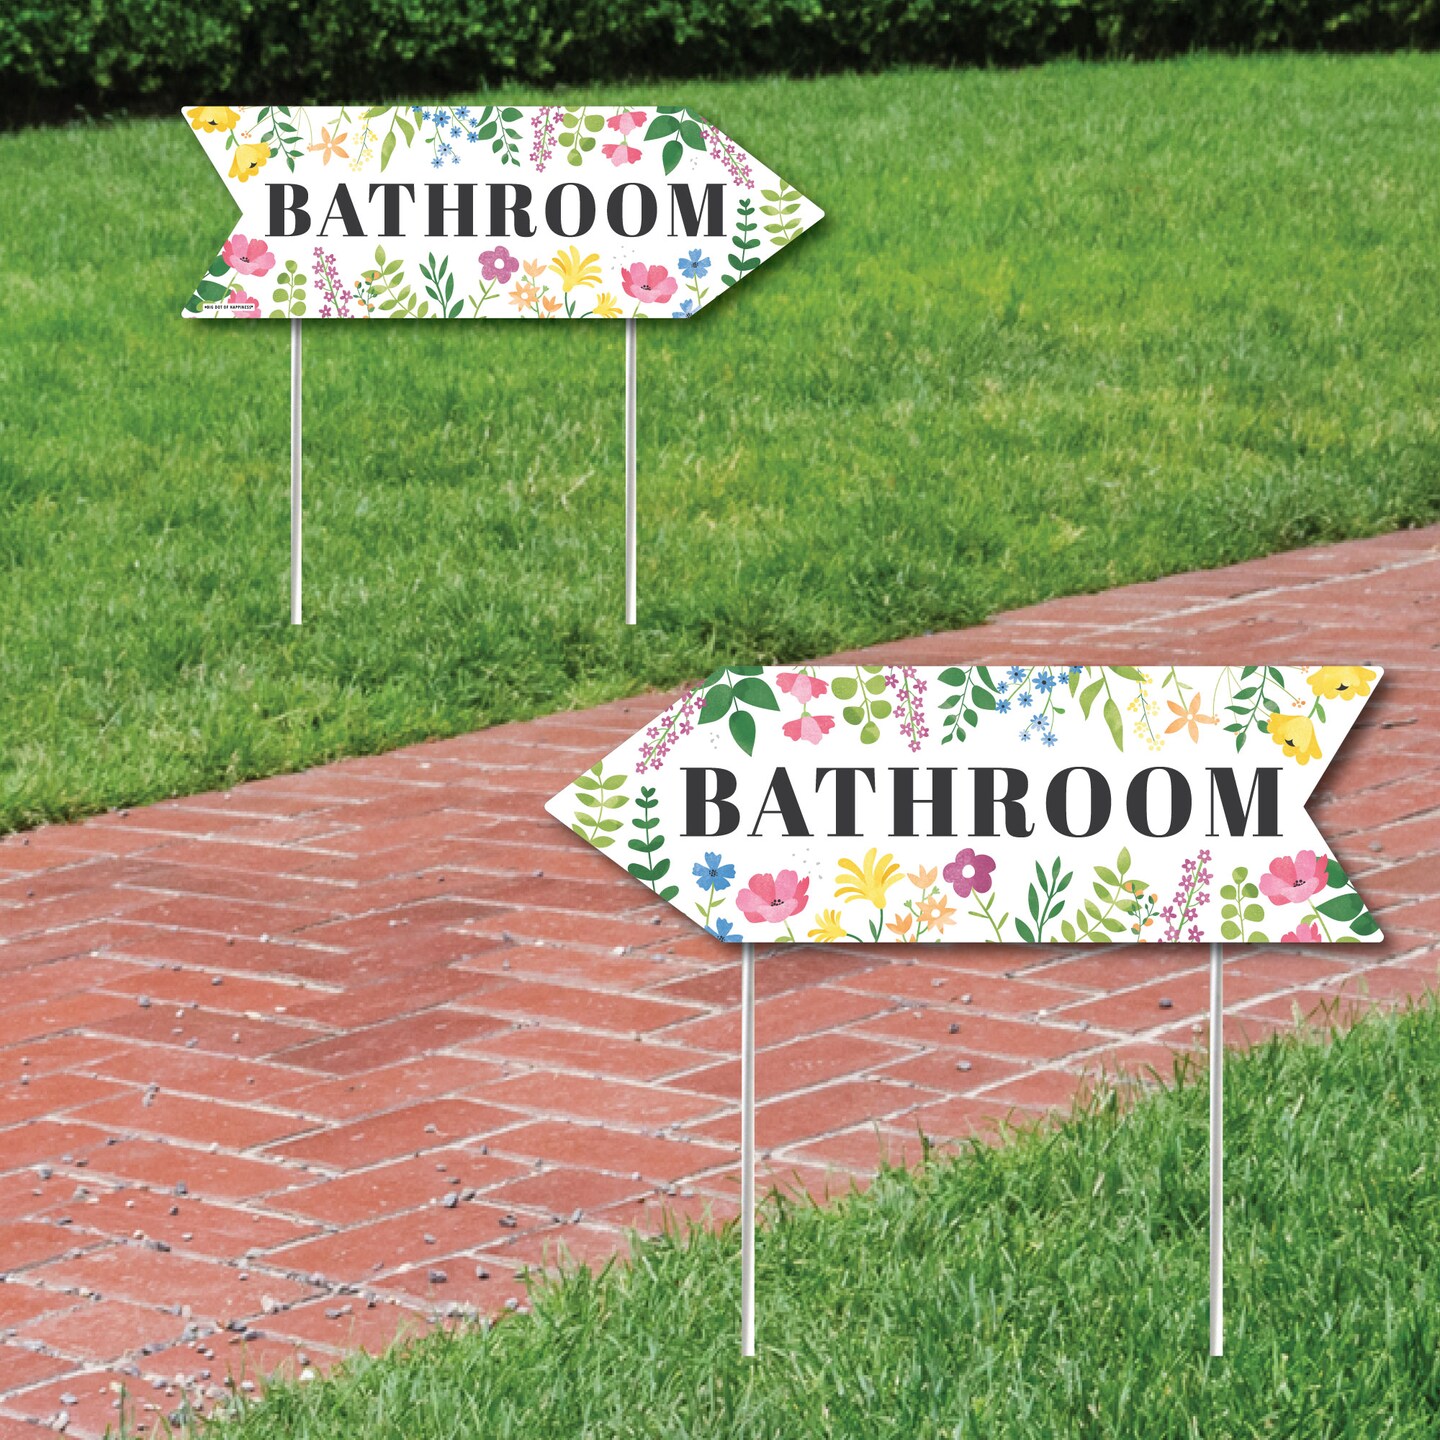 Big Dot of Happiness Wildflowers Wedding Bathroom Signs - Boho Floral Wedding Sign Arrow - Double Sided Directional Yard Signs - Set of 2